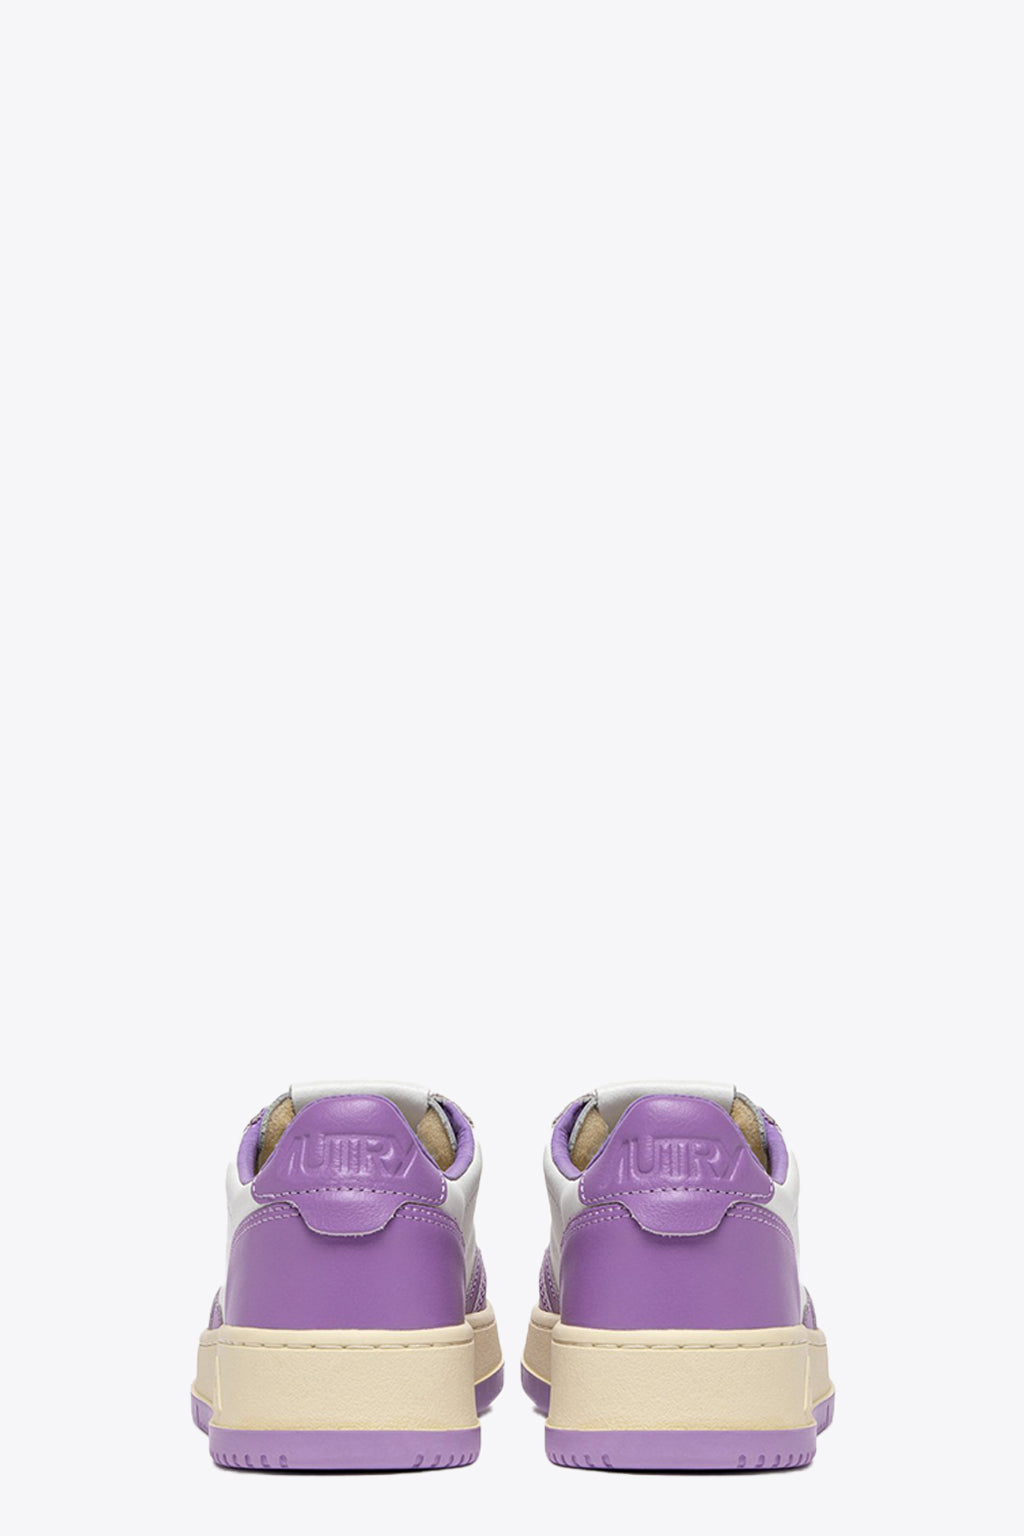 alt-image__Purple-and-white-leather-low-sneaker---Medalist